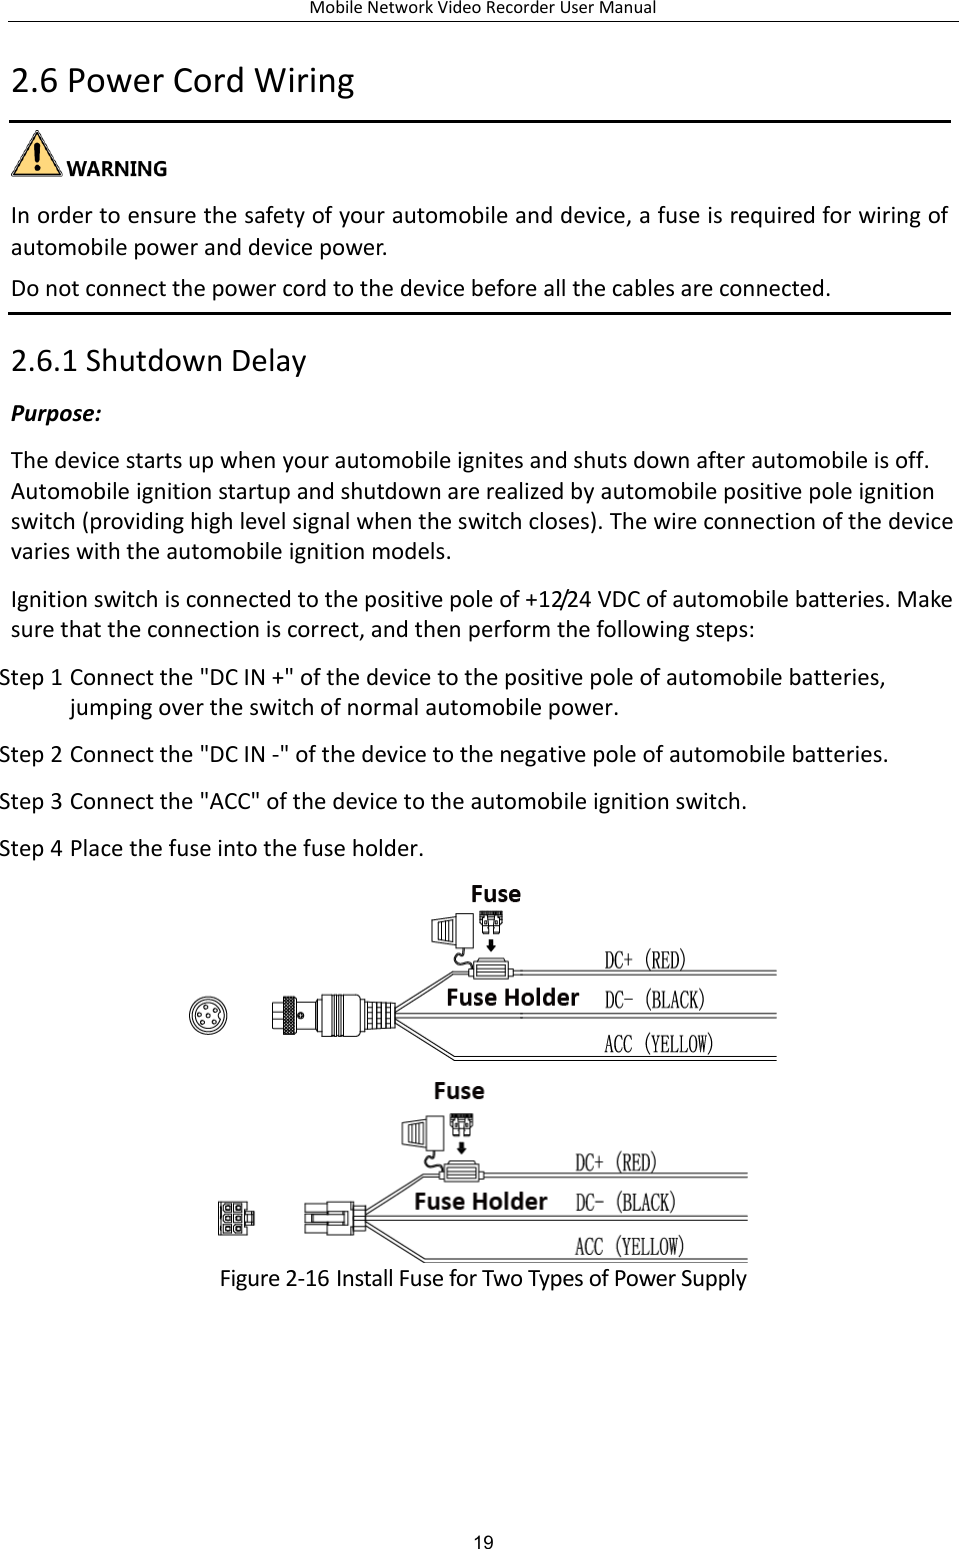 Mobile Network Video Recorder User Manual 19 2.6 Power Cord Wiring   In order to ensure the safety of your automobile and device, a fuse is required for wiring of automobile power and device power.   Do not connect the power cord to the device before all the cables are connected. 2.6.1 Shutdown Delay Purpose: The device starts up when your automobile ignites and shuts down after automobile is off. Automobile ignition startup and shutdown are realized by automobile positive pole ignition switch (providing high level signal when the switch closes). The wire connection of the device varies with the automobile ignition models. Ignition switch is connected to the positive pole of +12/24 VDC of automobile batteries. Make sure that the connection is correct, and then perform the following steps: Step 1 Connect the &quot;DC IN +&quot; of the device to the positive pole of automobile batteries, jumping over the switch of normal automobile power. Step 2 Connect the &quot;DC IN -&quot; of the device to the negative pole of automobile batteries. Step 3 Connect the &quot;ACC&quot; of the device to the automobile ignition switch. Step 4 Place the fuse into the fuse holder.   Figure 2-16 Install Fuse for Two Types of Power Supply 